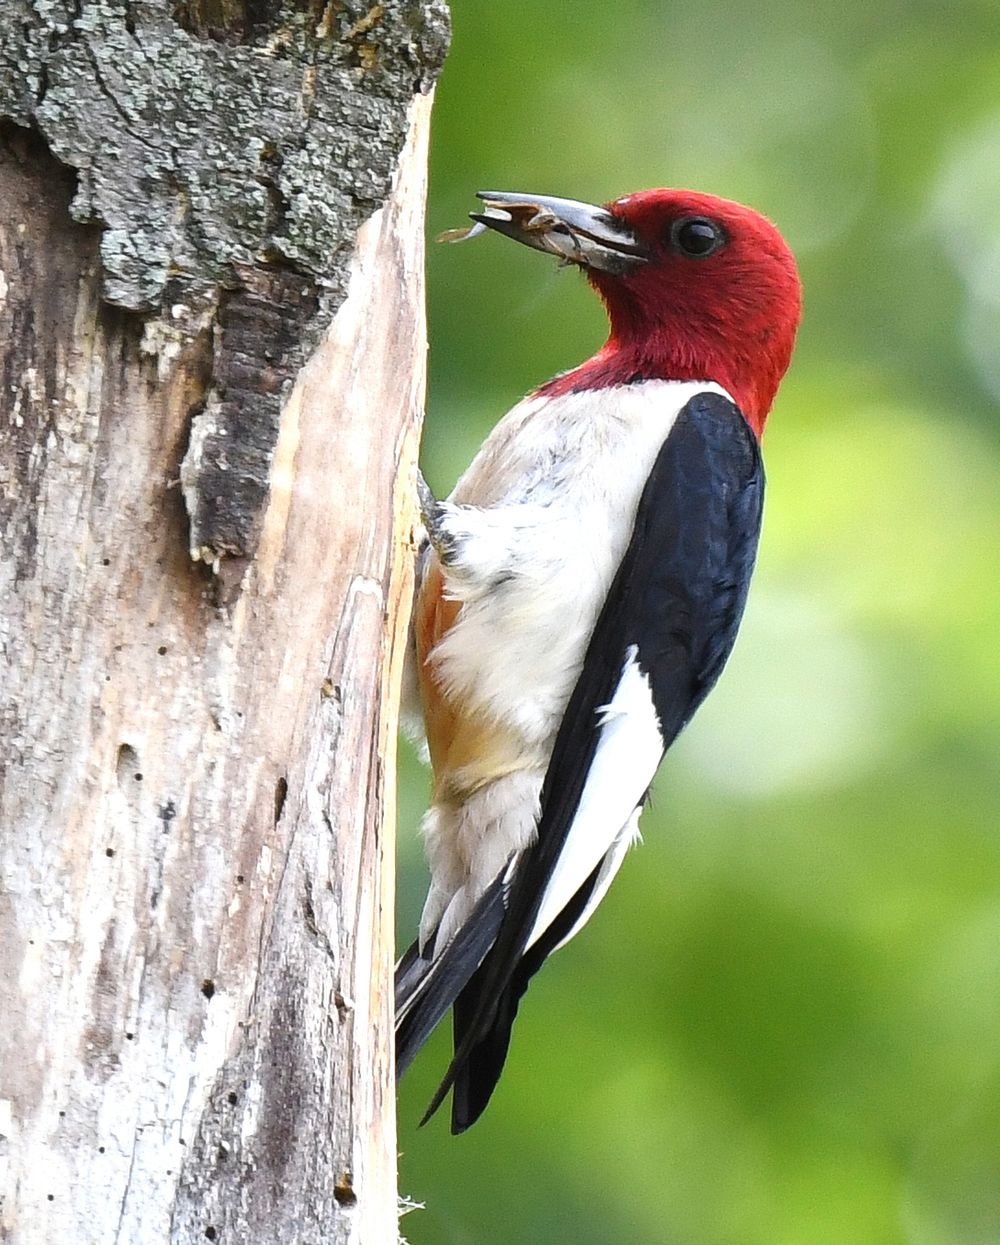 Red-headed woodpecker. Red-headed woodpeckers are skilled hunters, often catching insects in flight. While insects, fruits…